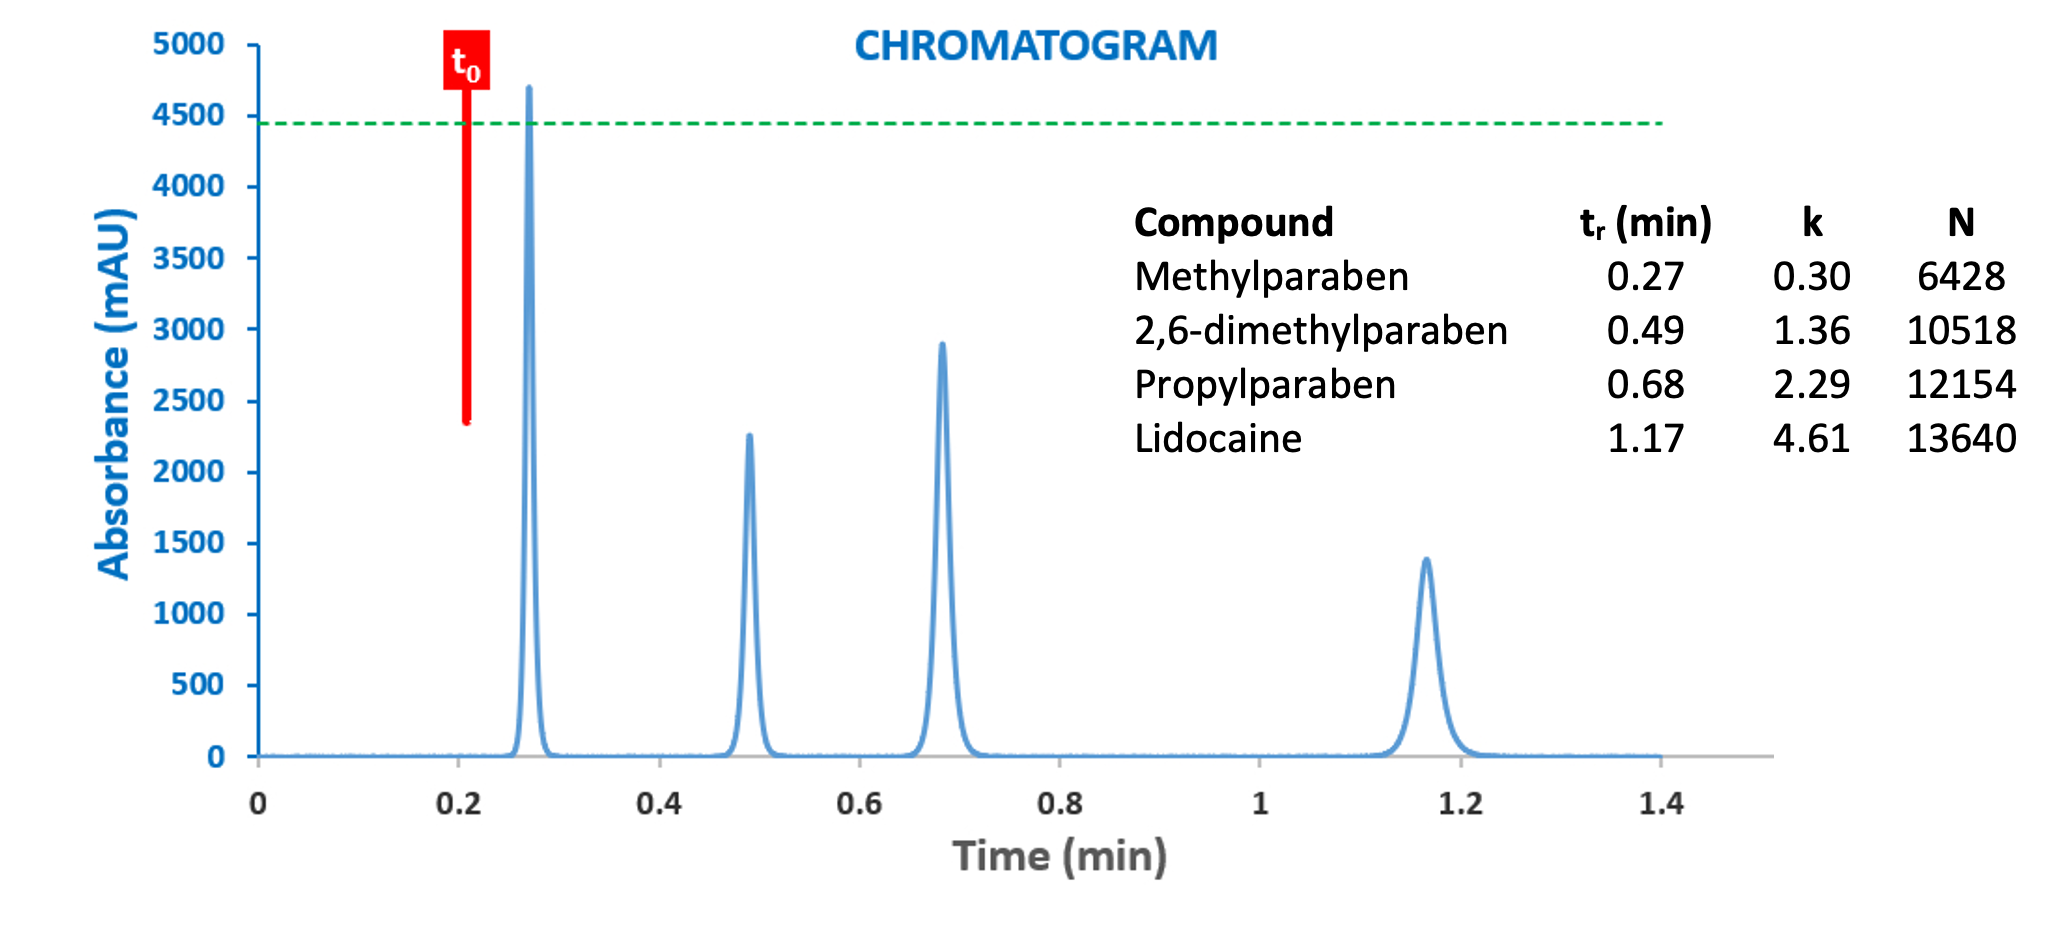 Figure 4: Chromatogram generated by the HPLC Simulator of Reference 3 and the chromatogram resulting form the highly optimised model UHPLC system of Figure 3.